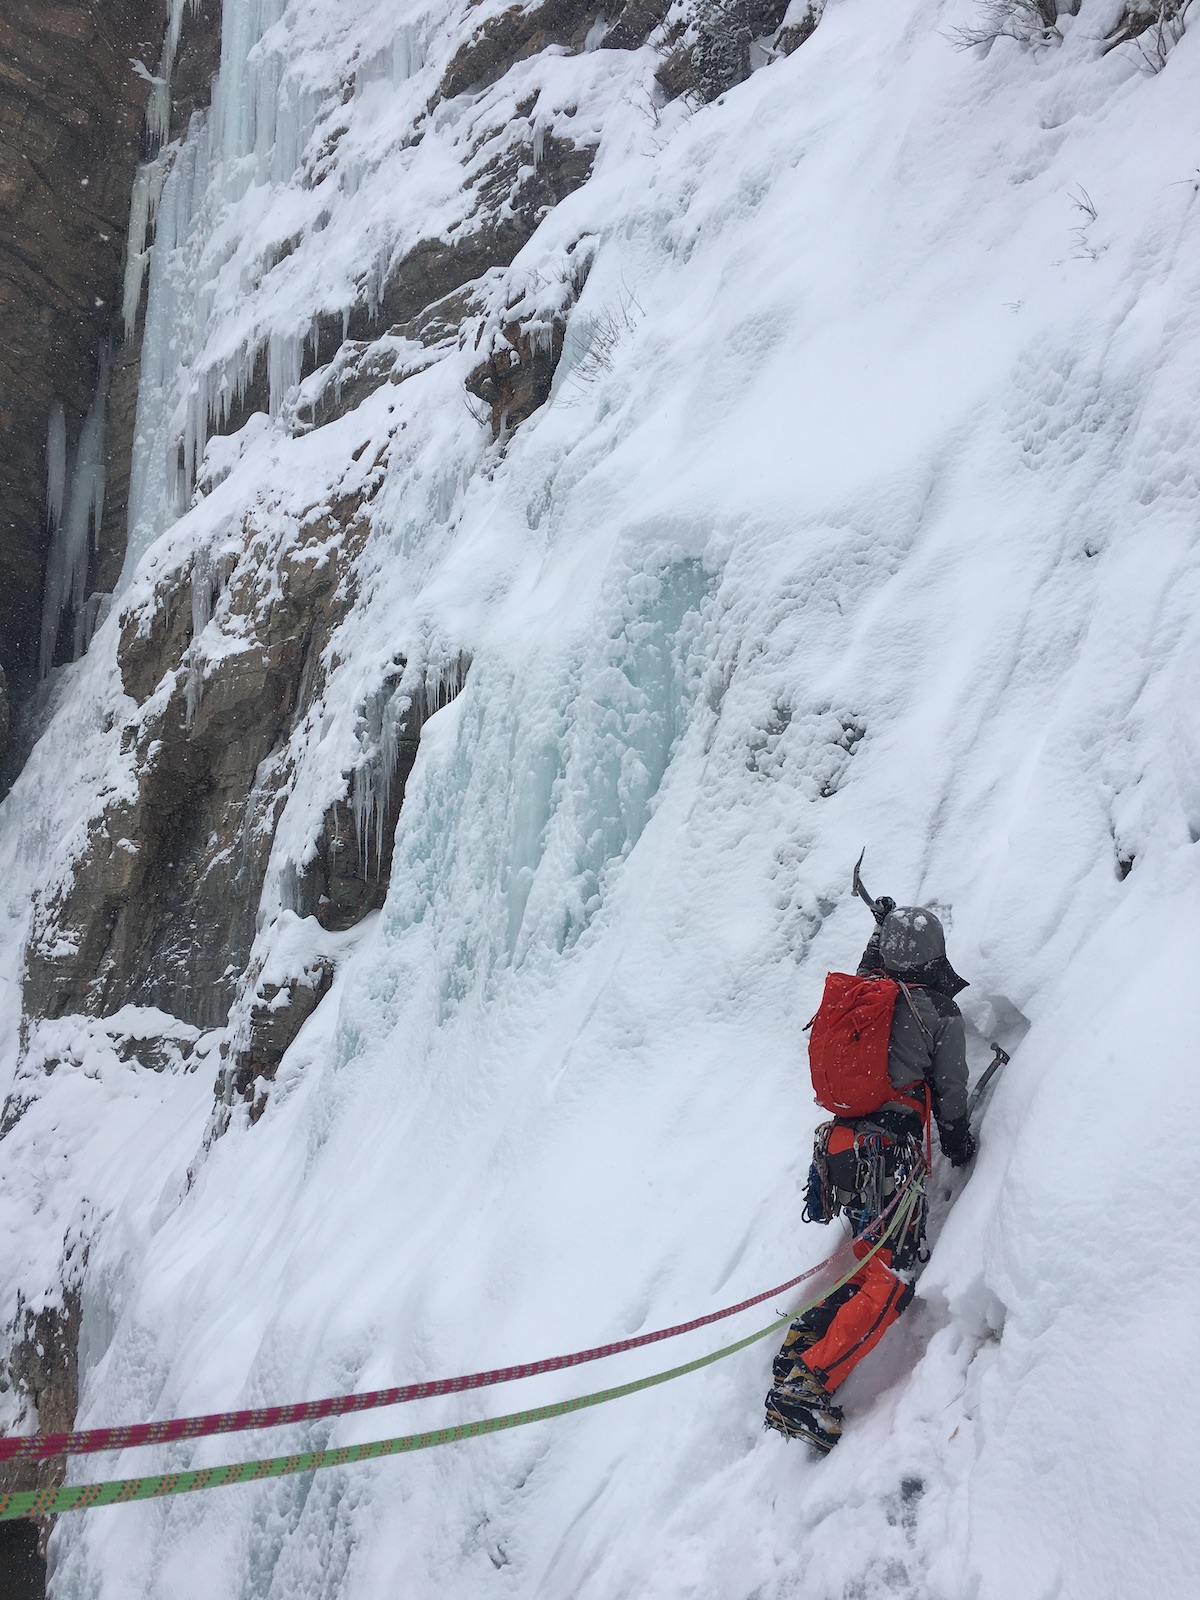 Franz leads Pitch 2 of Hidden Falls with the Mountain Equipment Tupilak 30. [Photo] Craig Helm